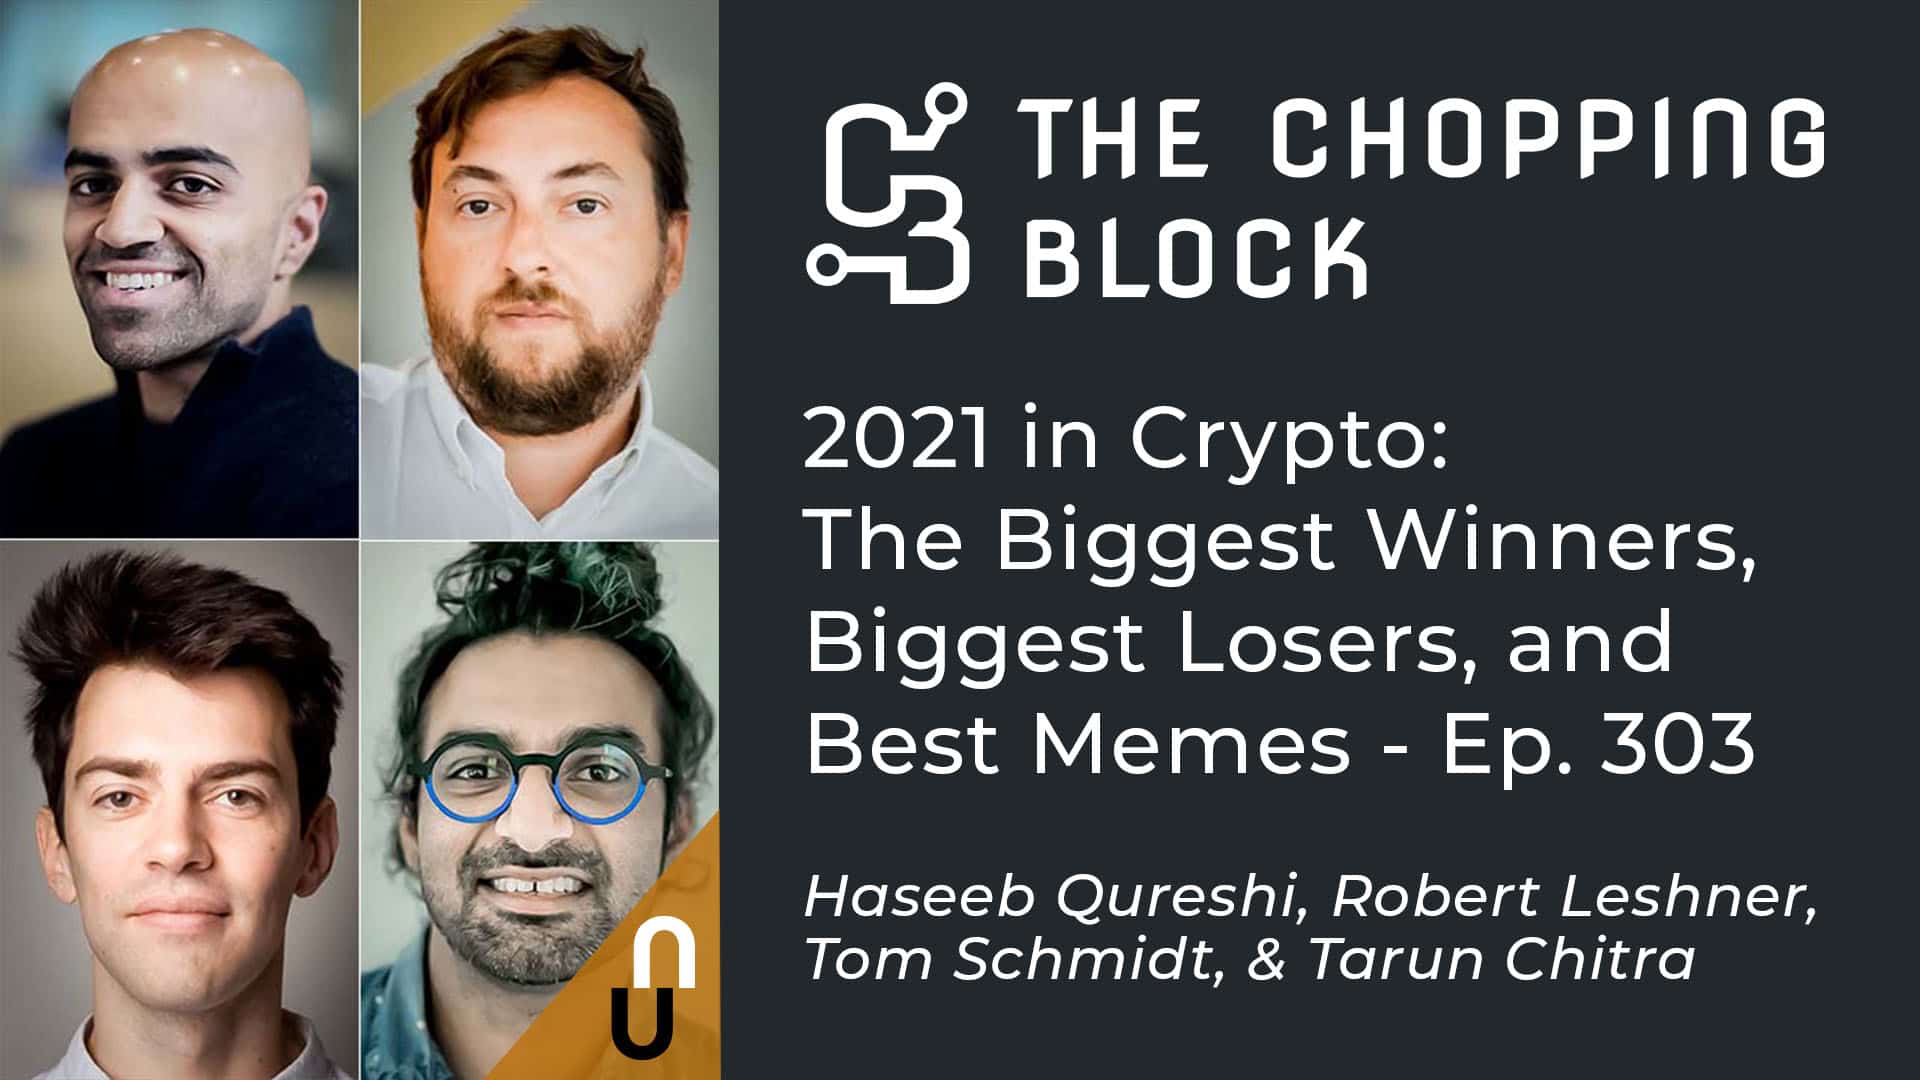 The Chopping Block… 2021 in Crypto: The Biggest Winners, Biggest Losers, and Best Memes